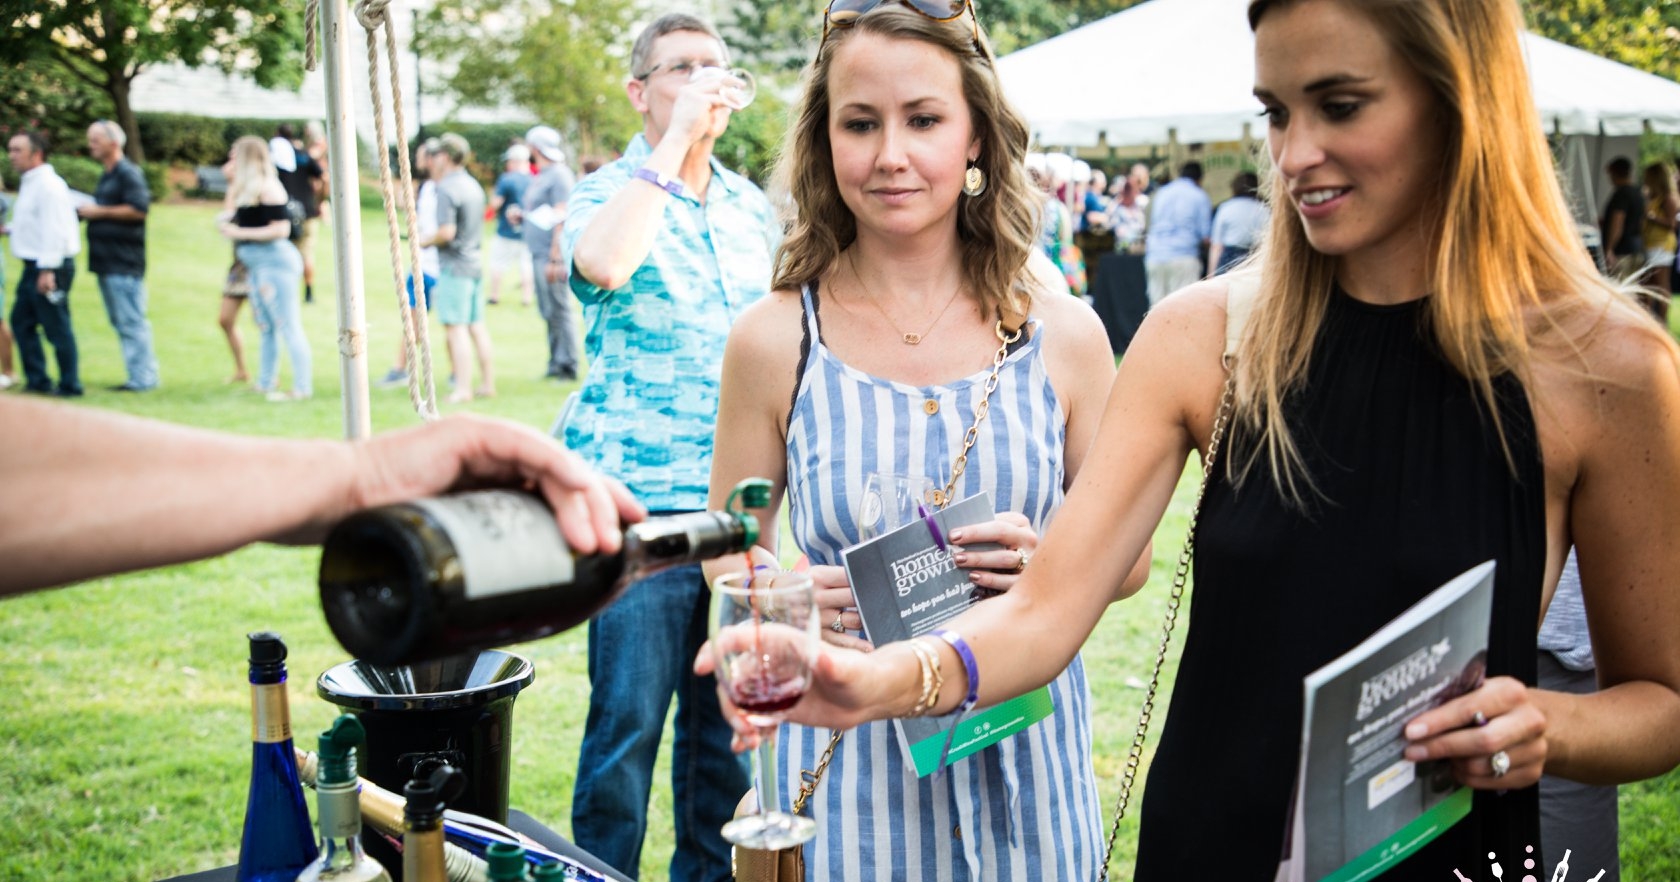 3 reasons why you should get ready now for Crush Wine Festival on September 25